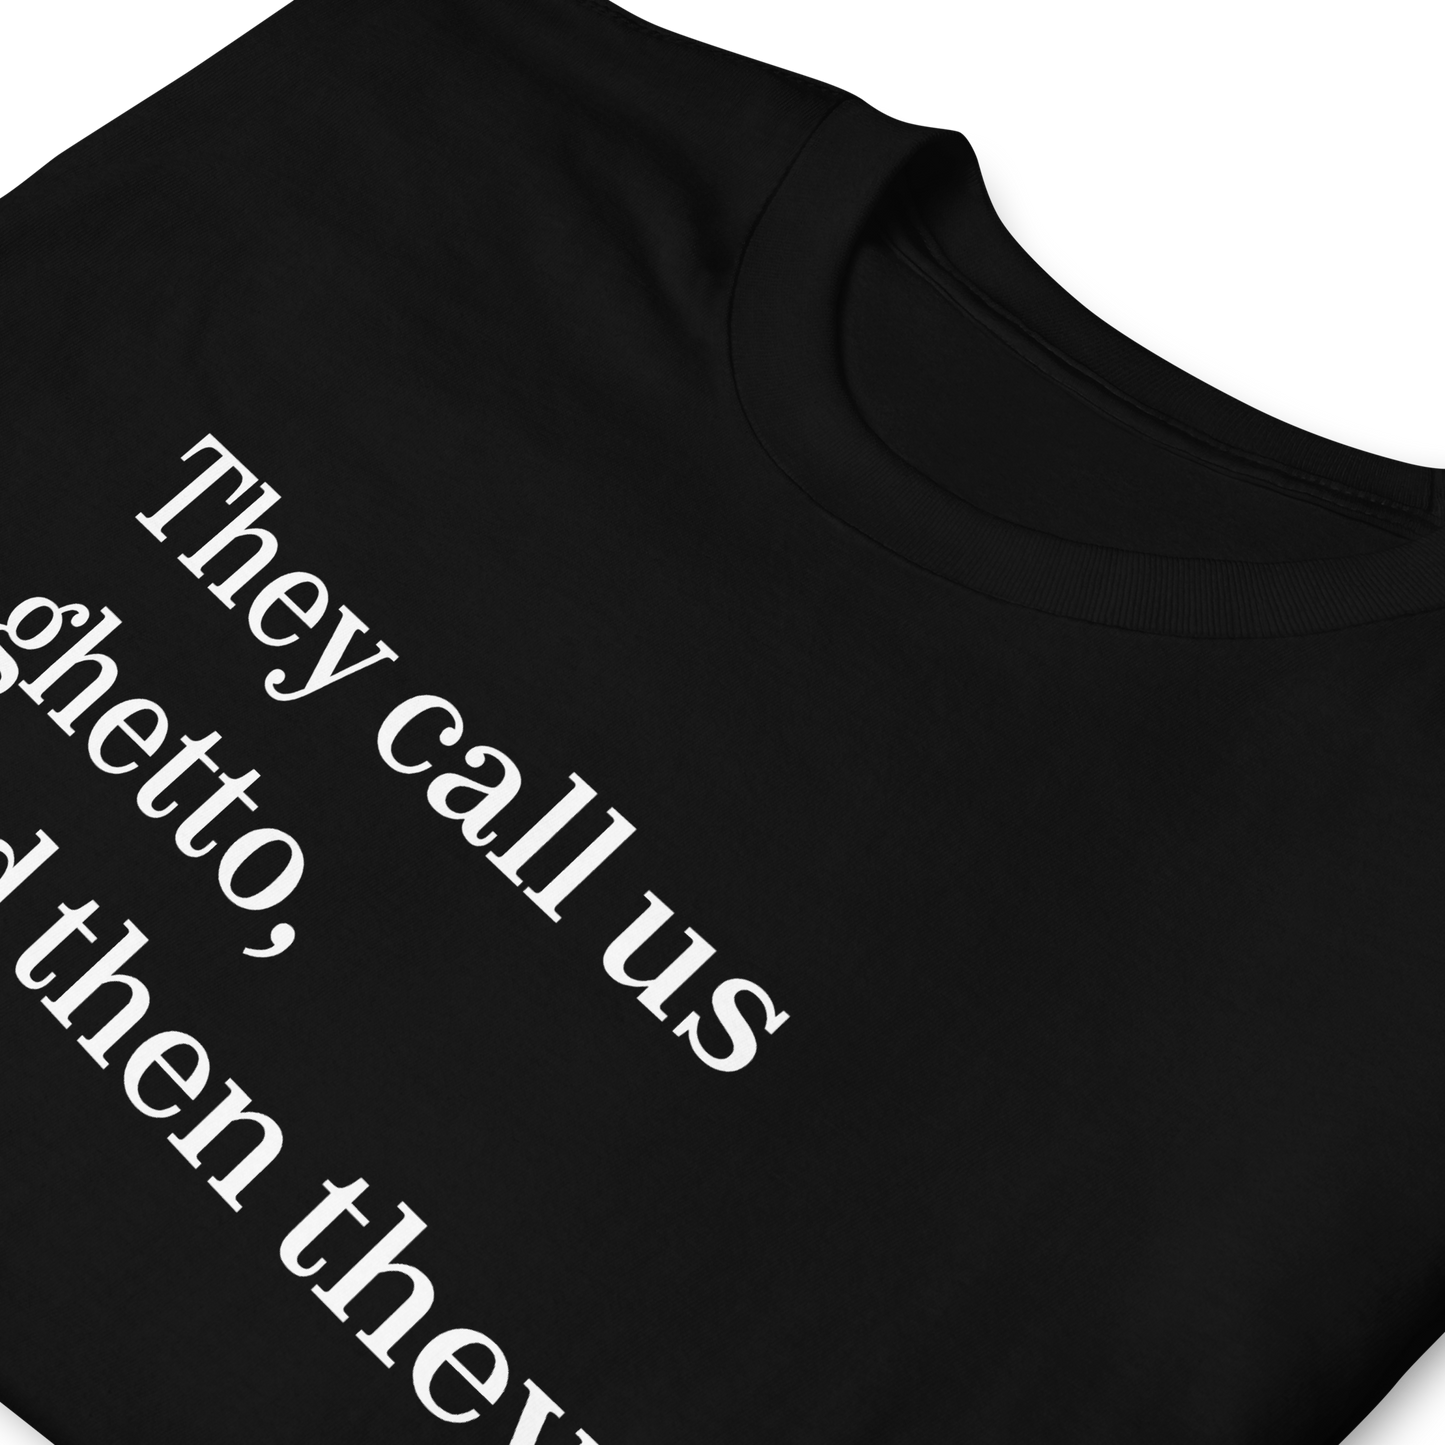 They Call Us Ghetto, And Then They Copy. T-Shirt